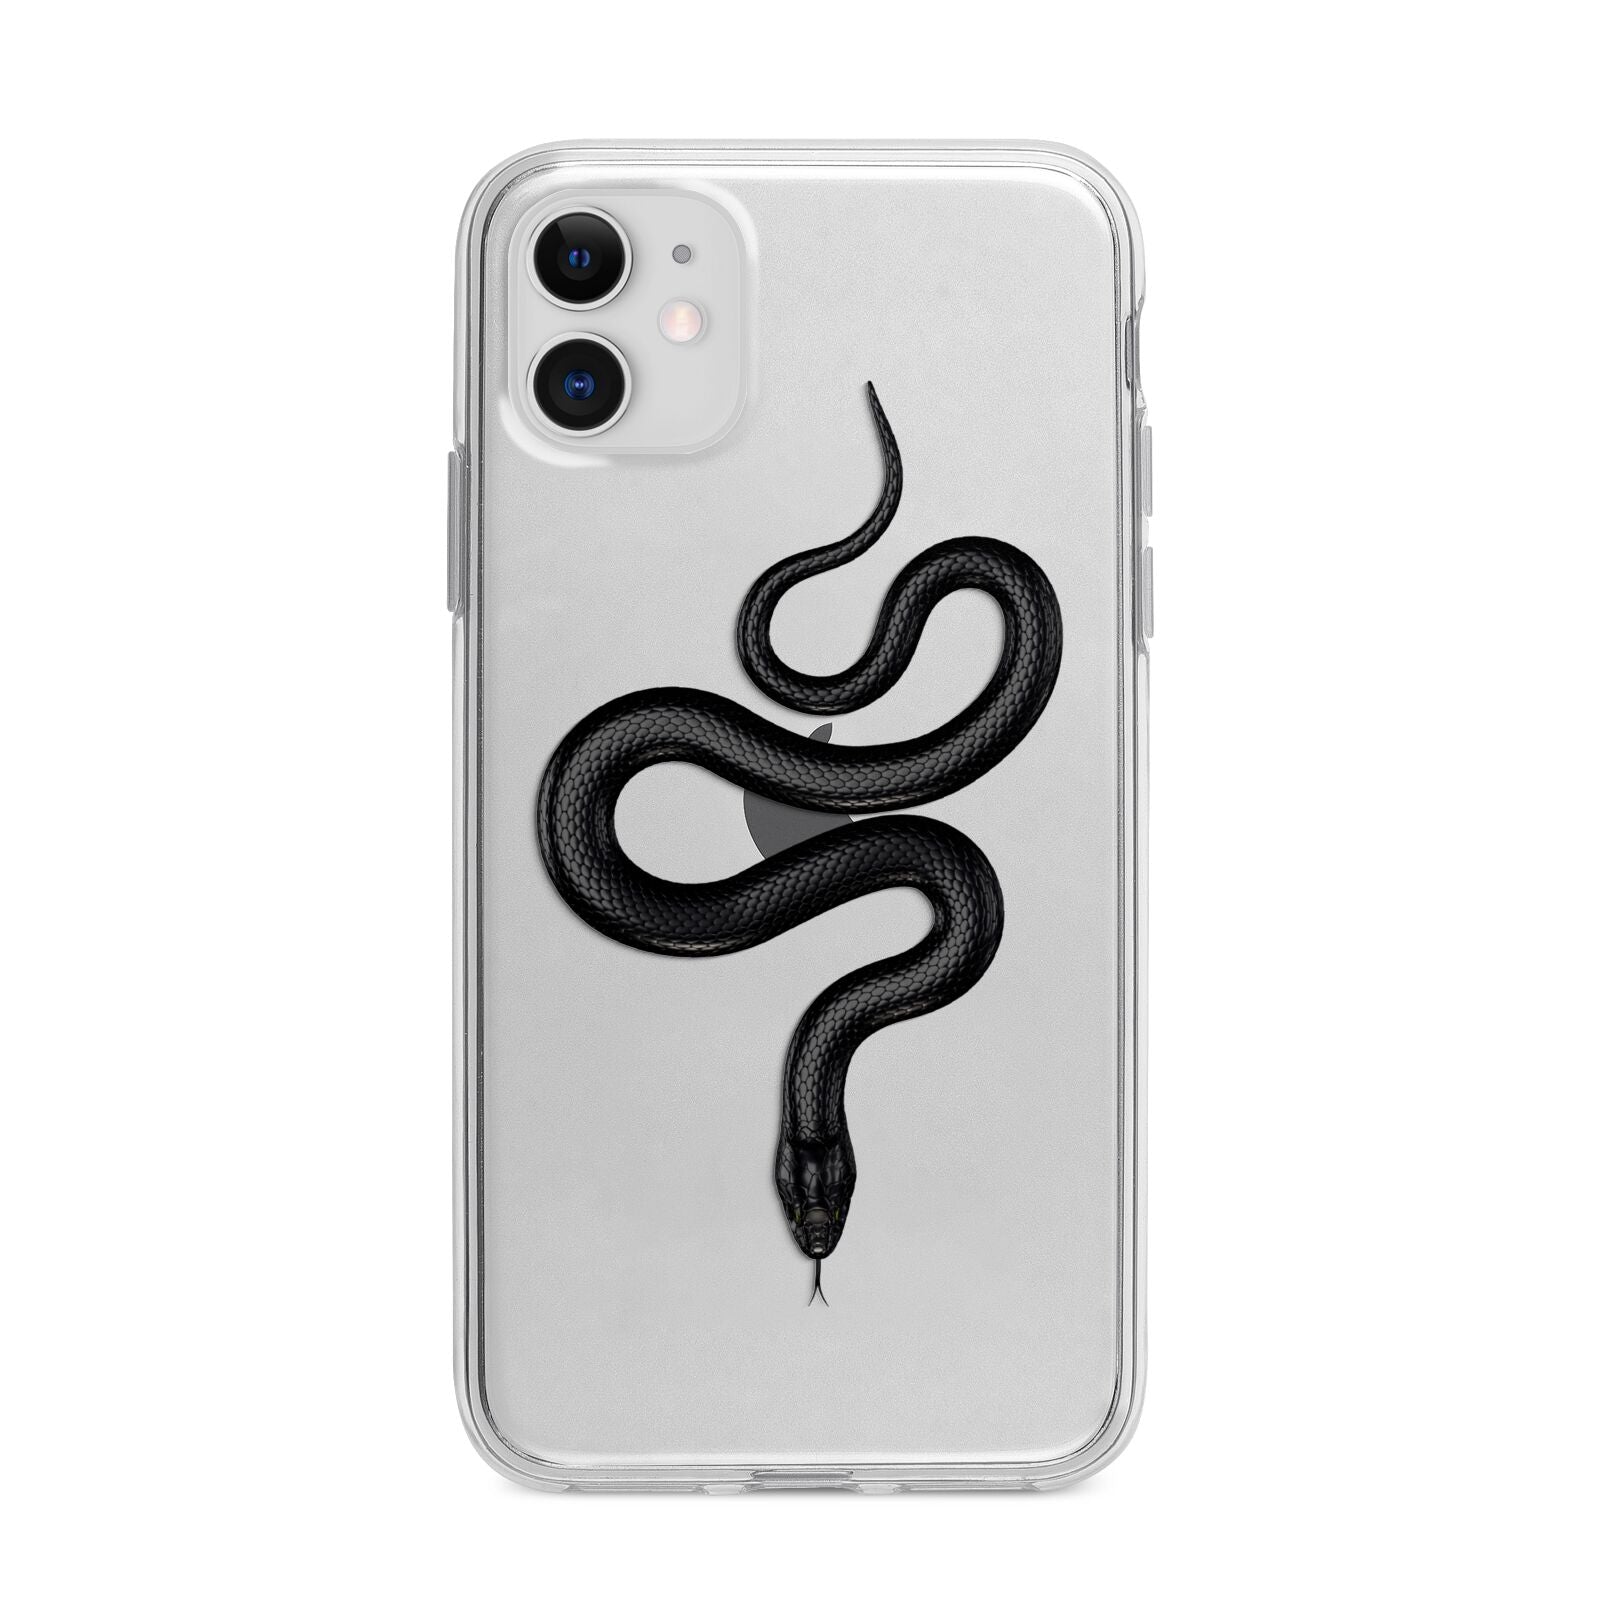 Snake Apple iPhone 11 in White with Bumper Case